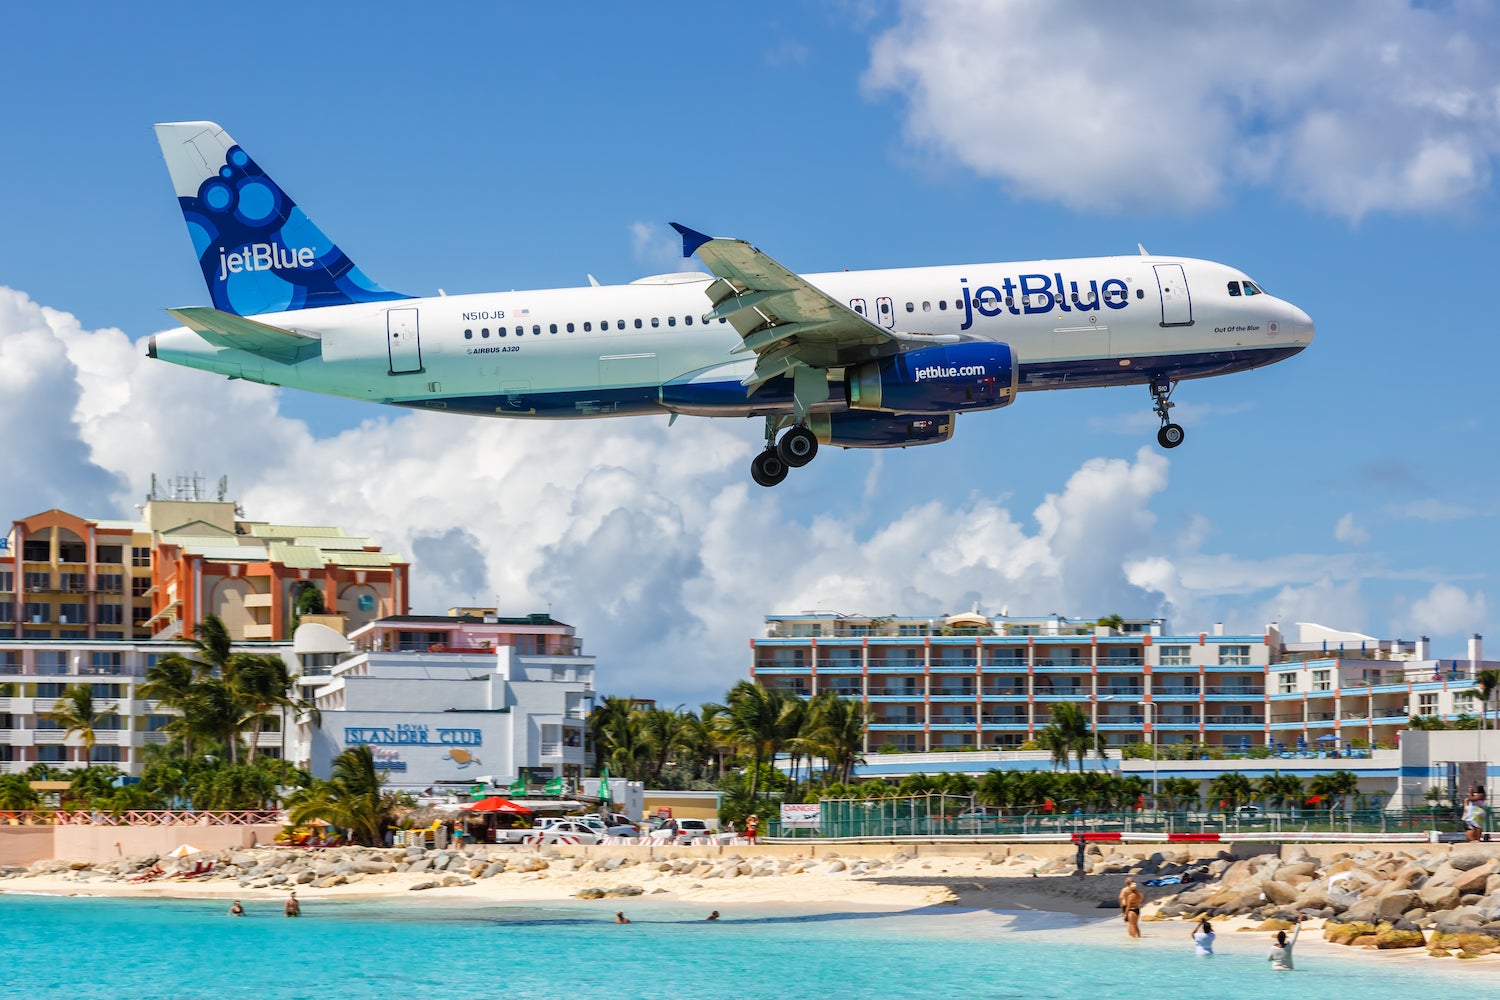 etBlue Airbus A320 airplane at Sint Maarten Airport in the Netherlands Antilles